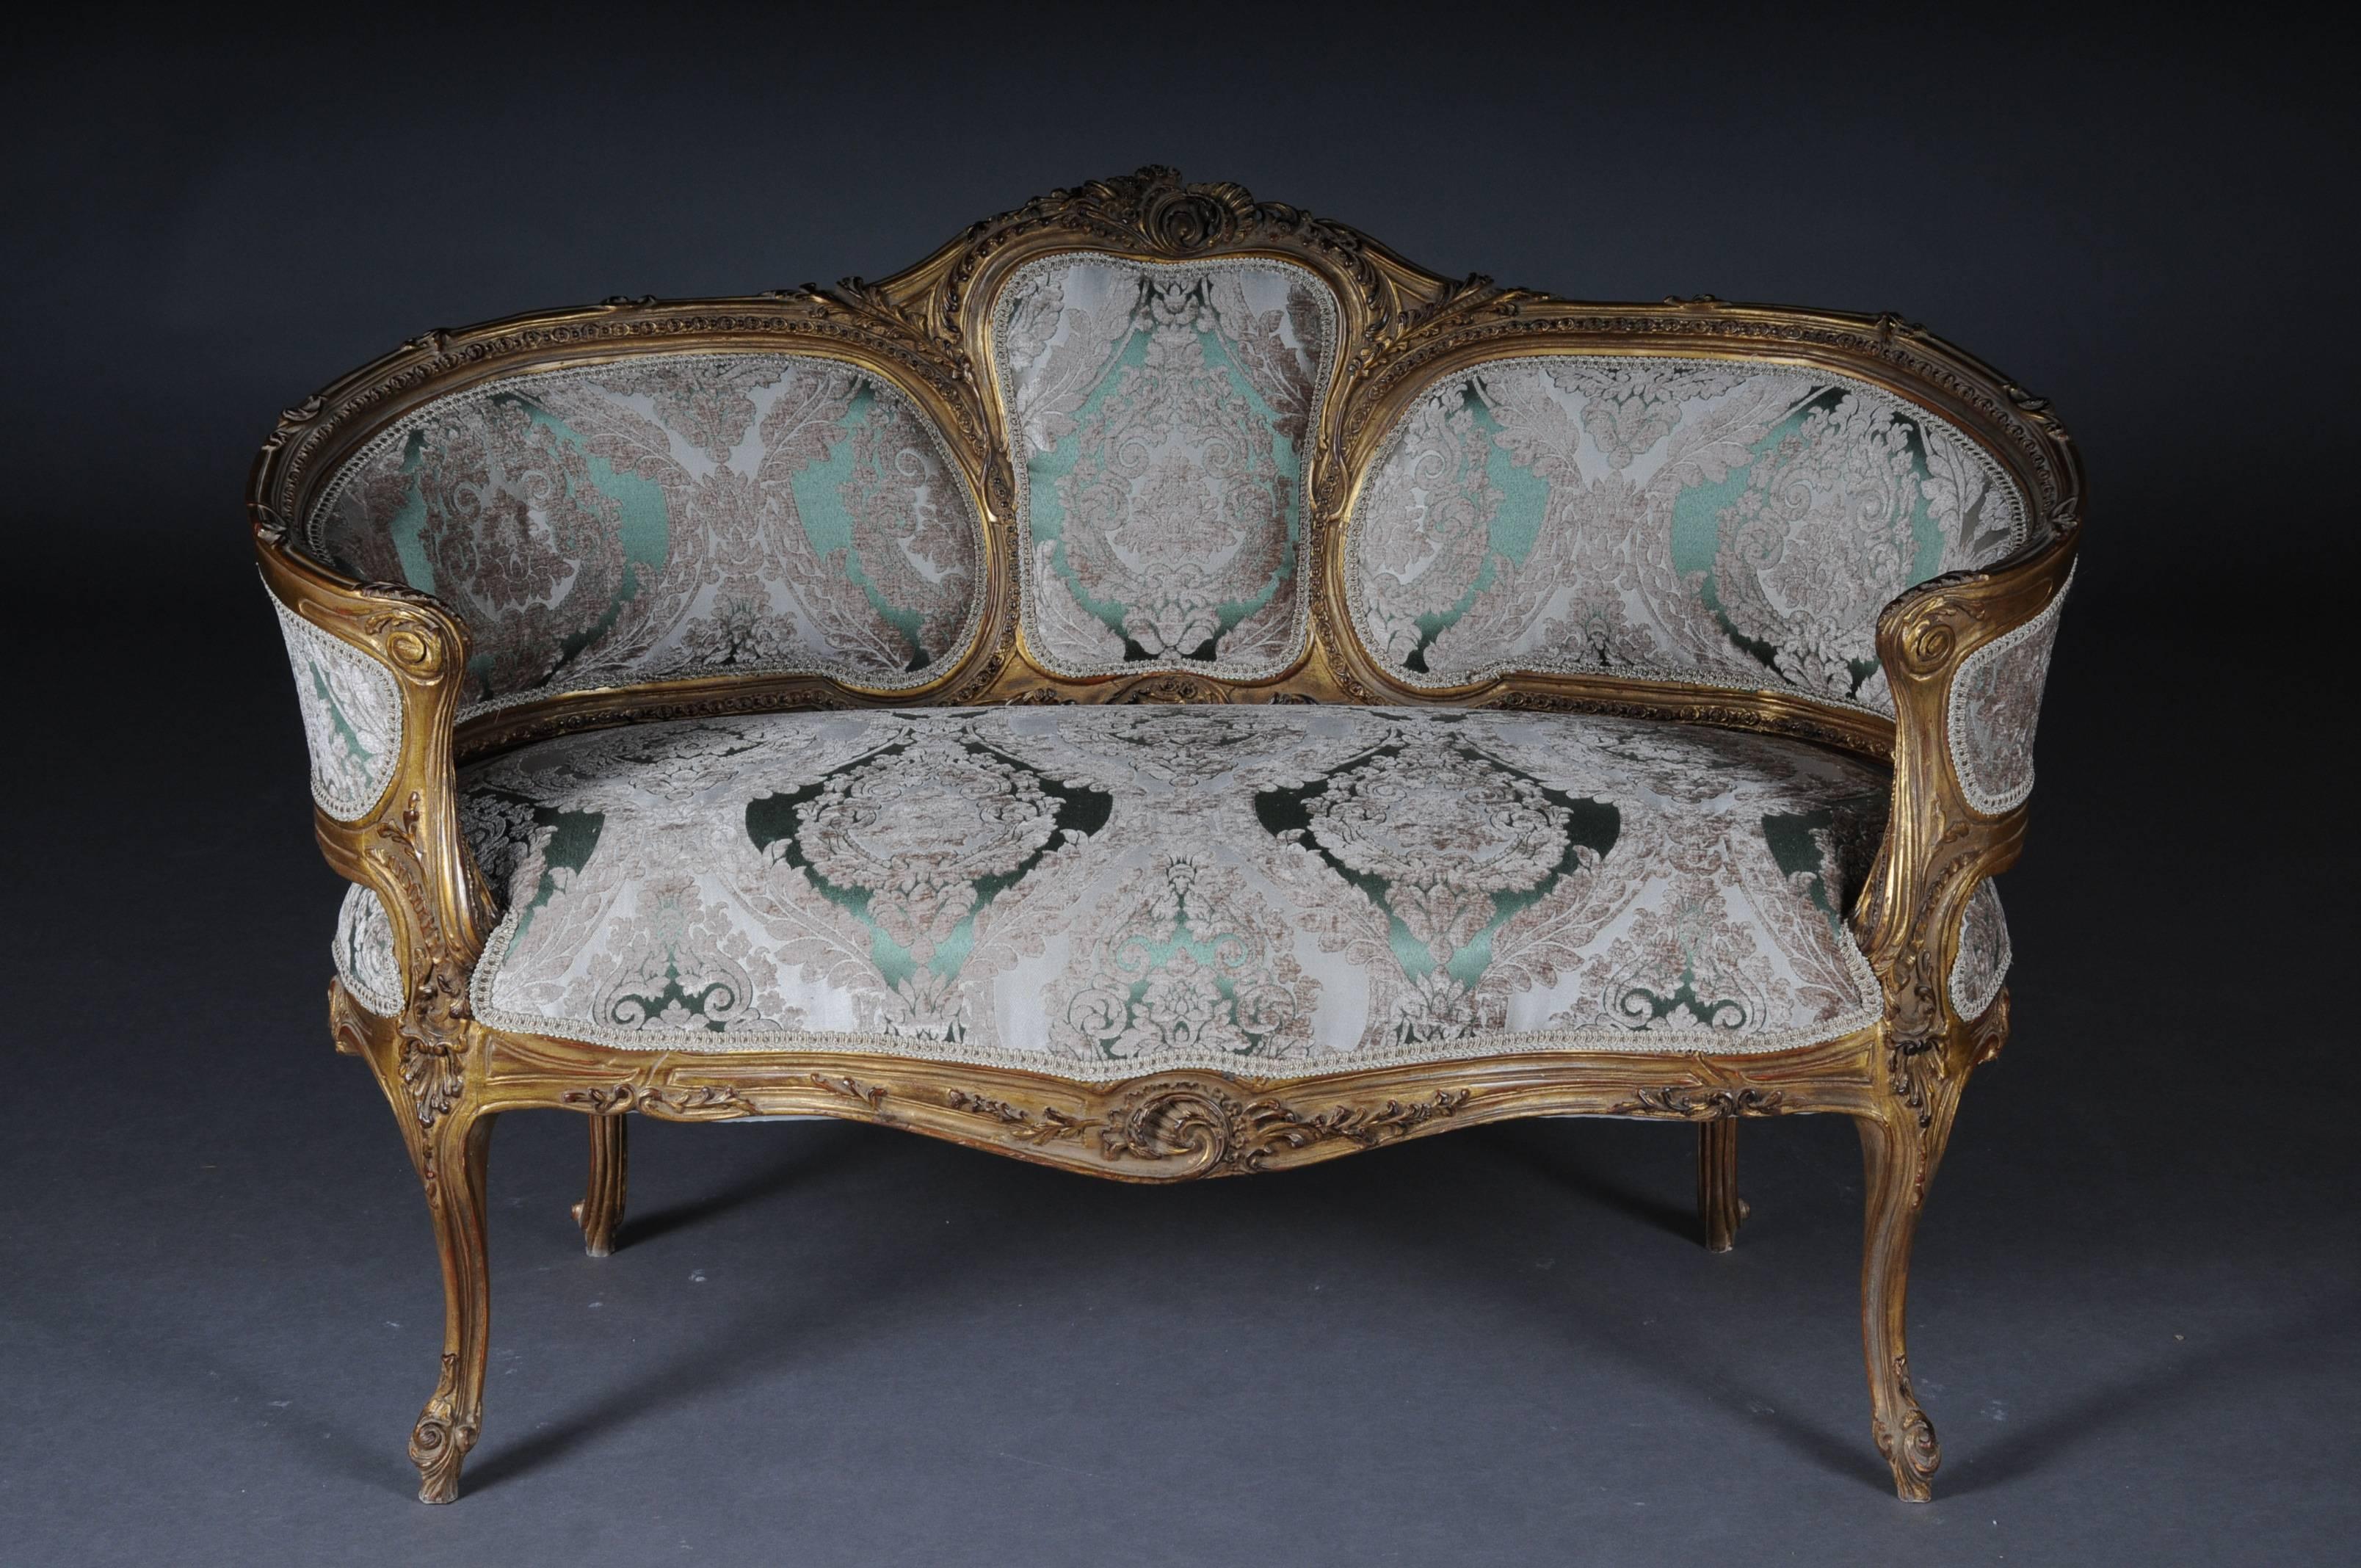 Solid beechwood, carved and gilt gilded. Semicircular rising, curved backrest framing with rocaille crowning. Appropriately curved frame with rich carved ornaments. Also decorated frame on curved legs. Seat and backrest are finished with a